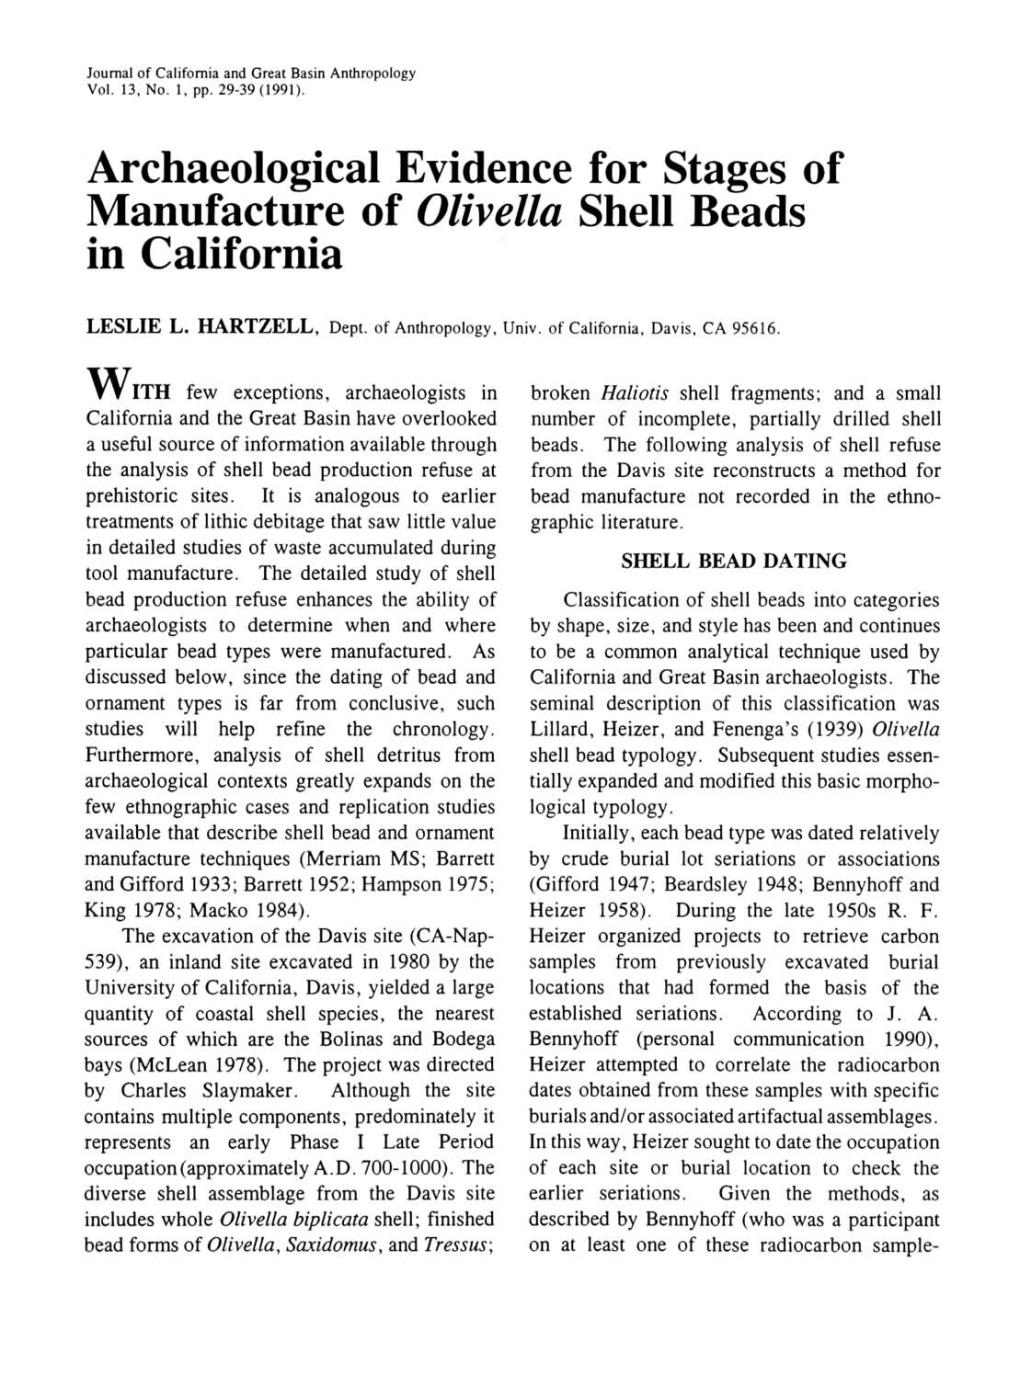 Archaeological Evidence for Stages of Manufacture of Olivella Shell Beads in California